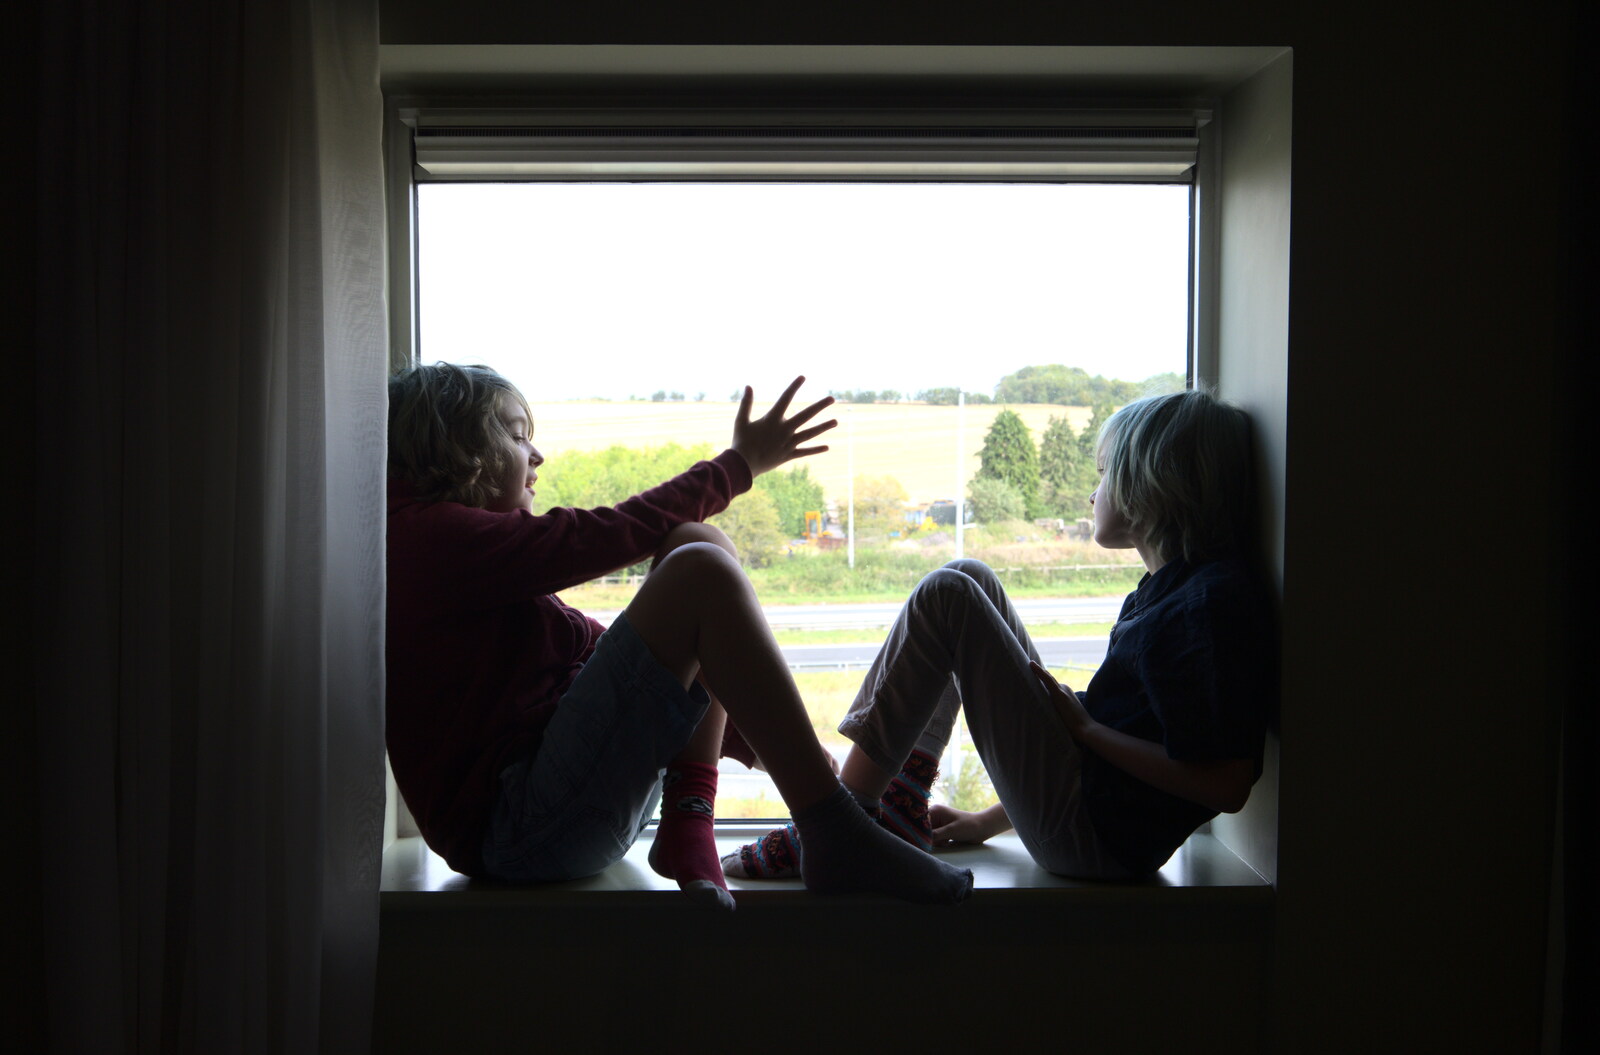 Fred and Harry chat on the windowsill from Stone Circles: Stonehenge and Avebury, Wiltshire - 22nd August 2020